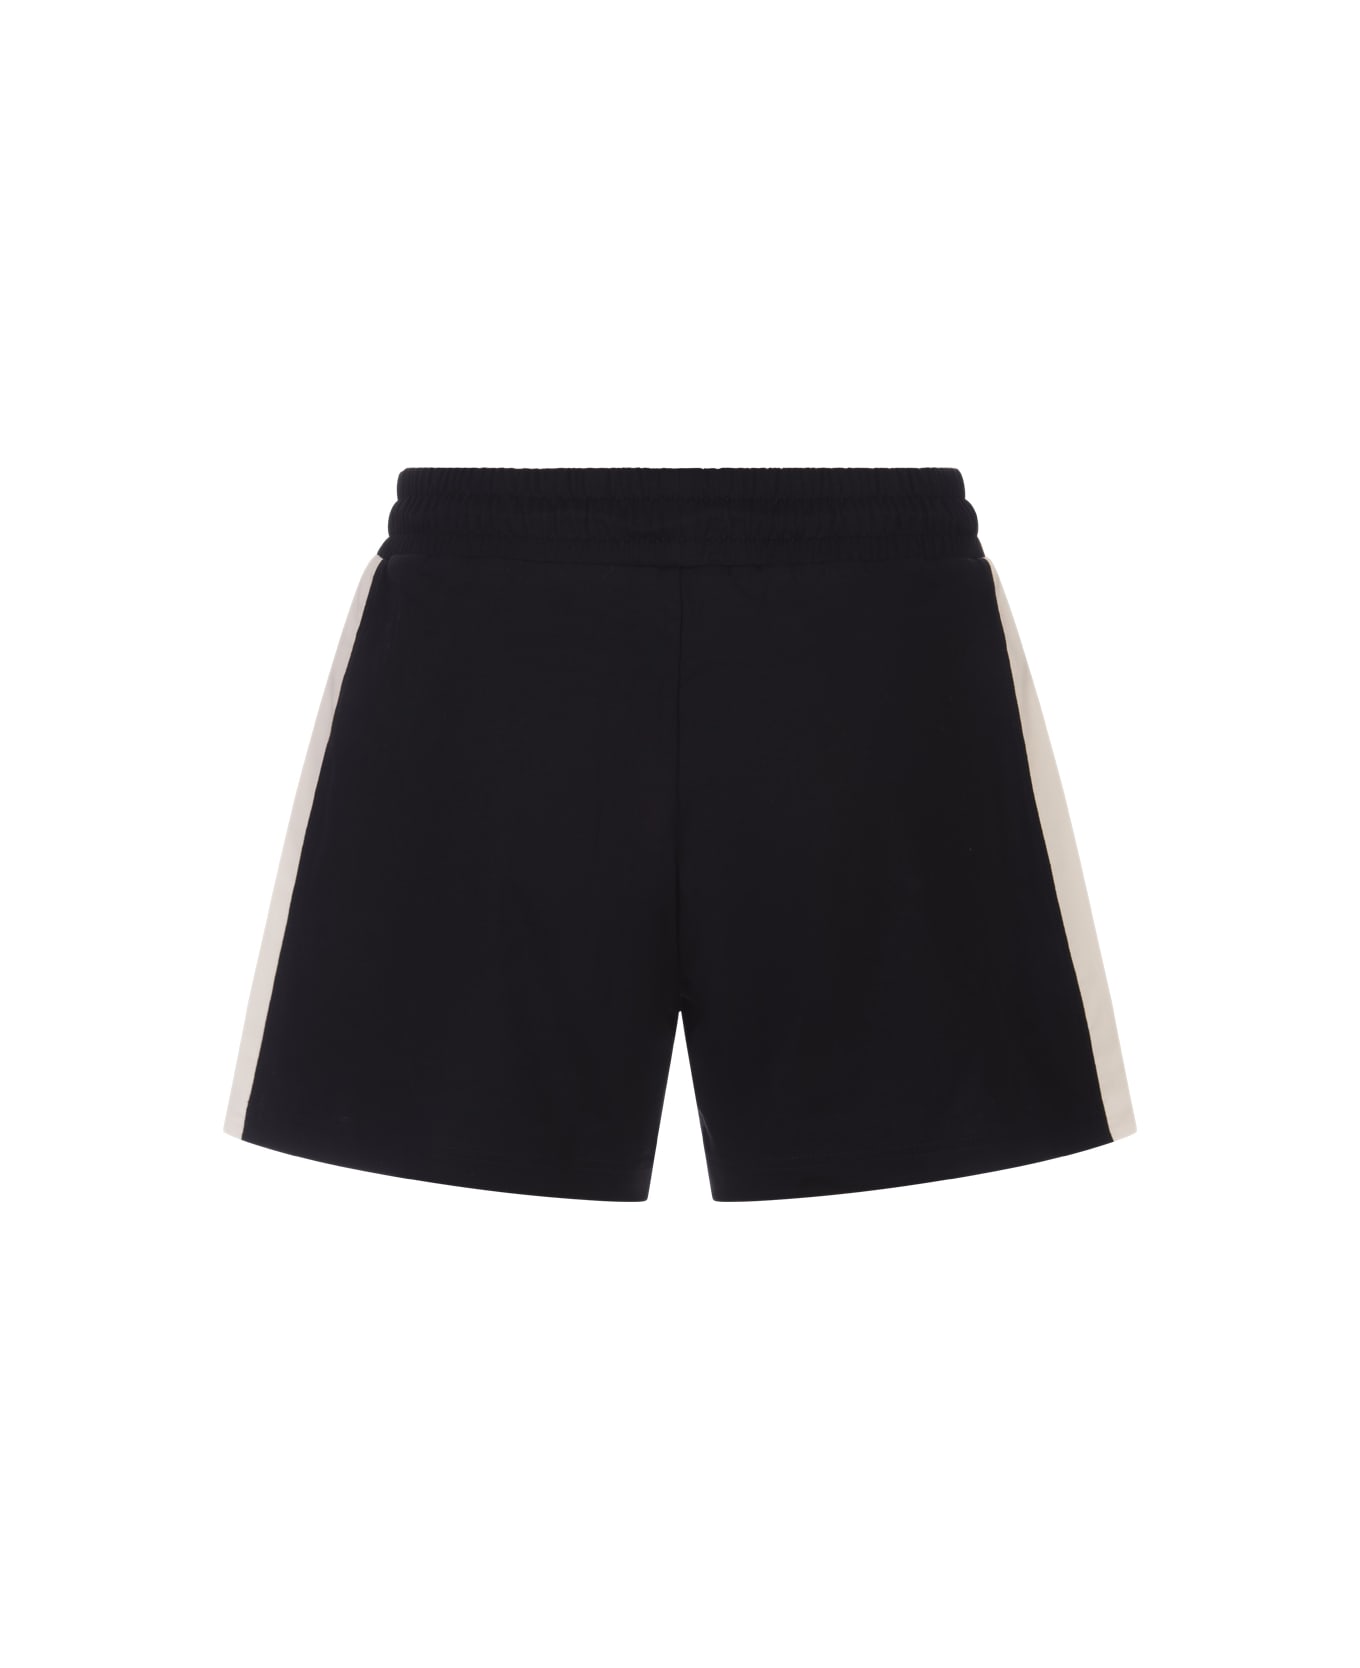 Moncler Navy Blue And White Jersey Shorts - Black